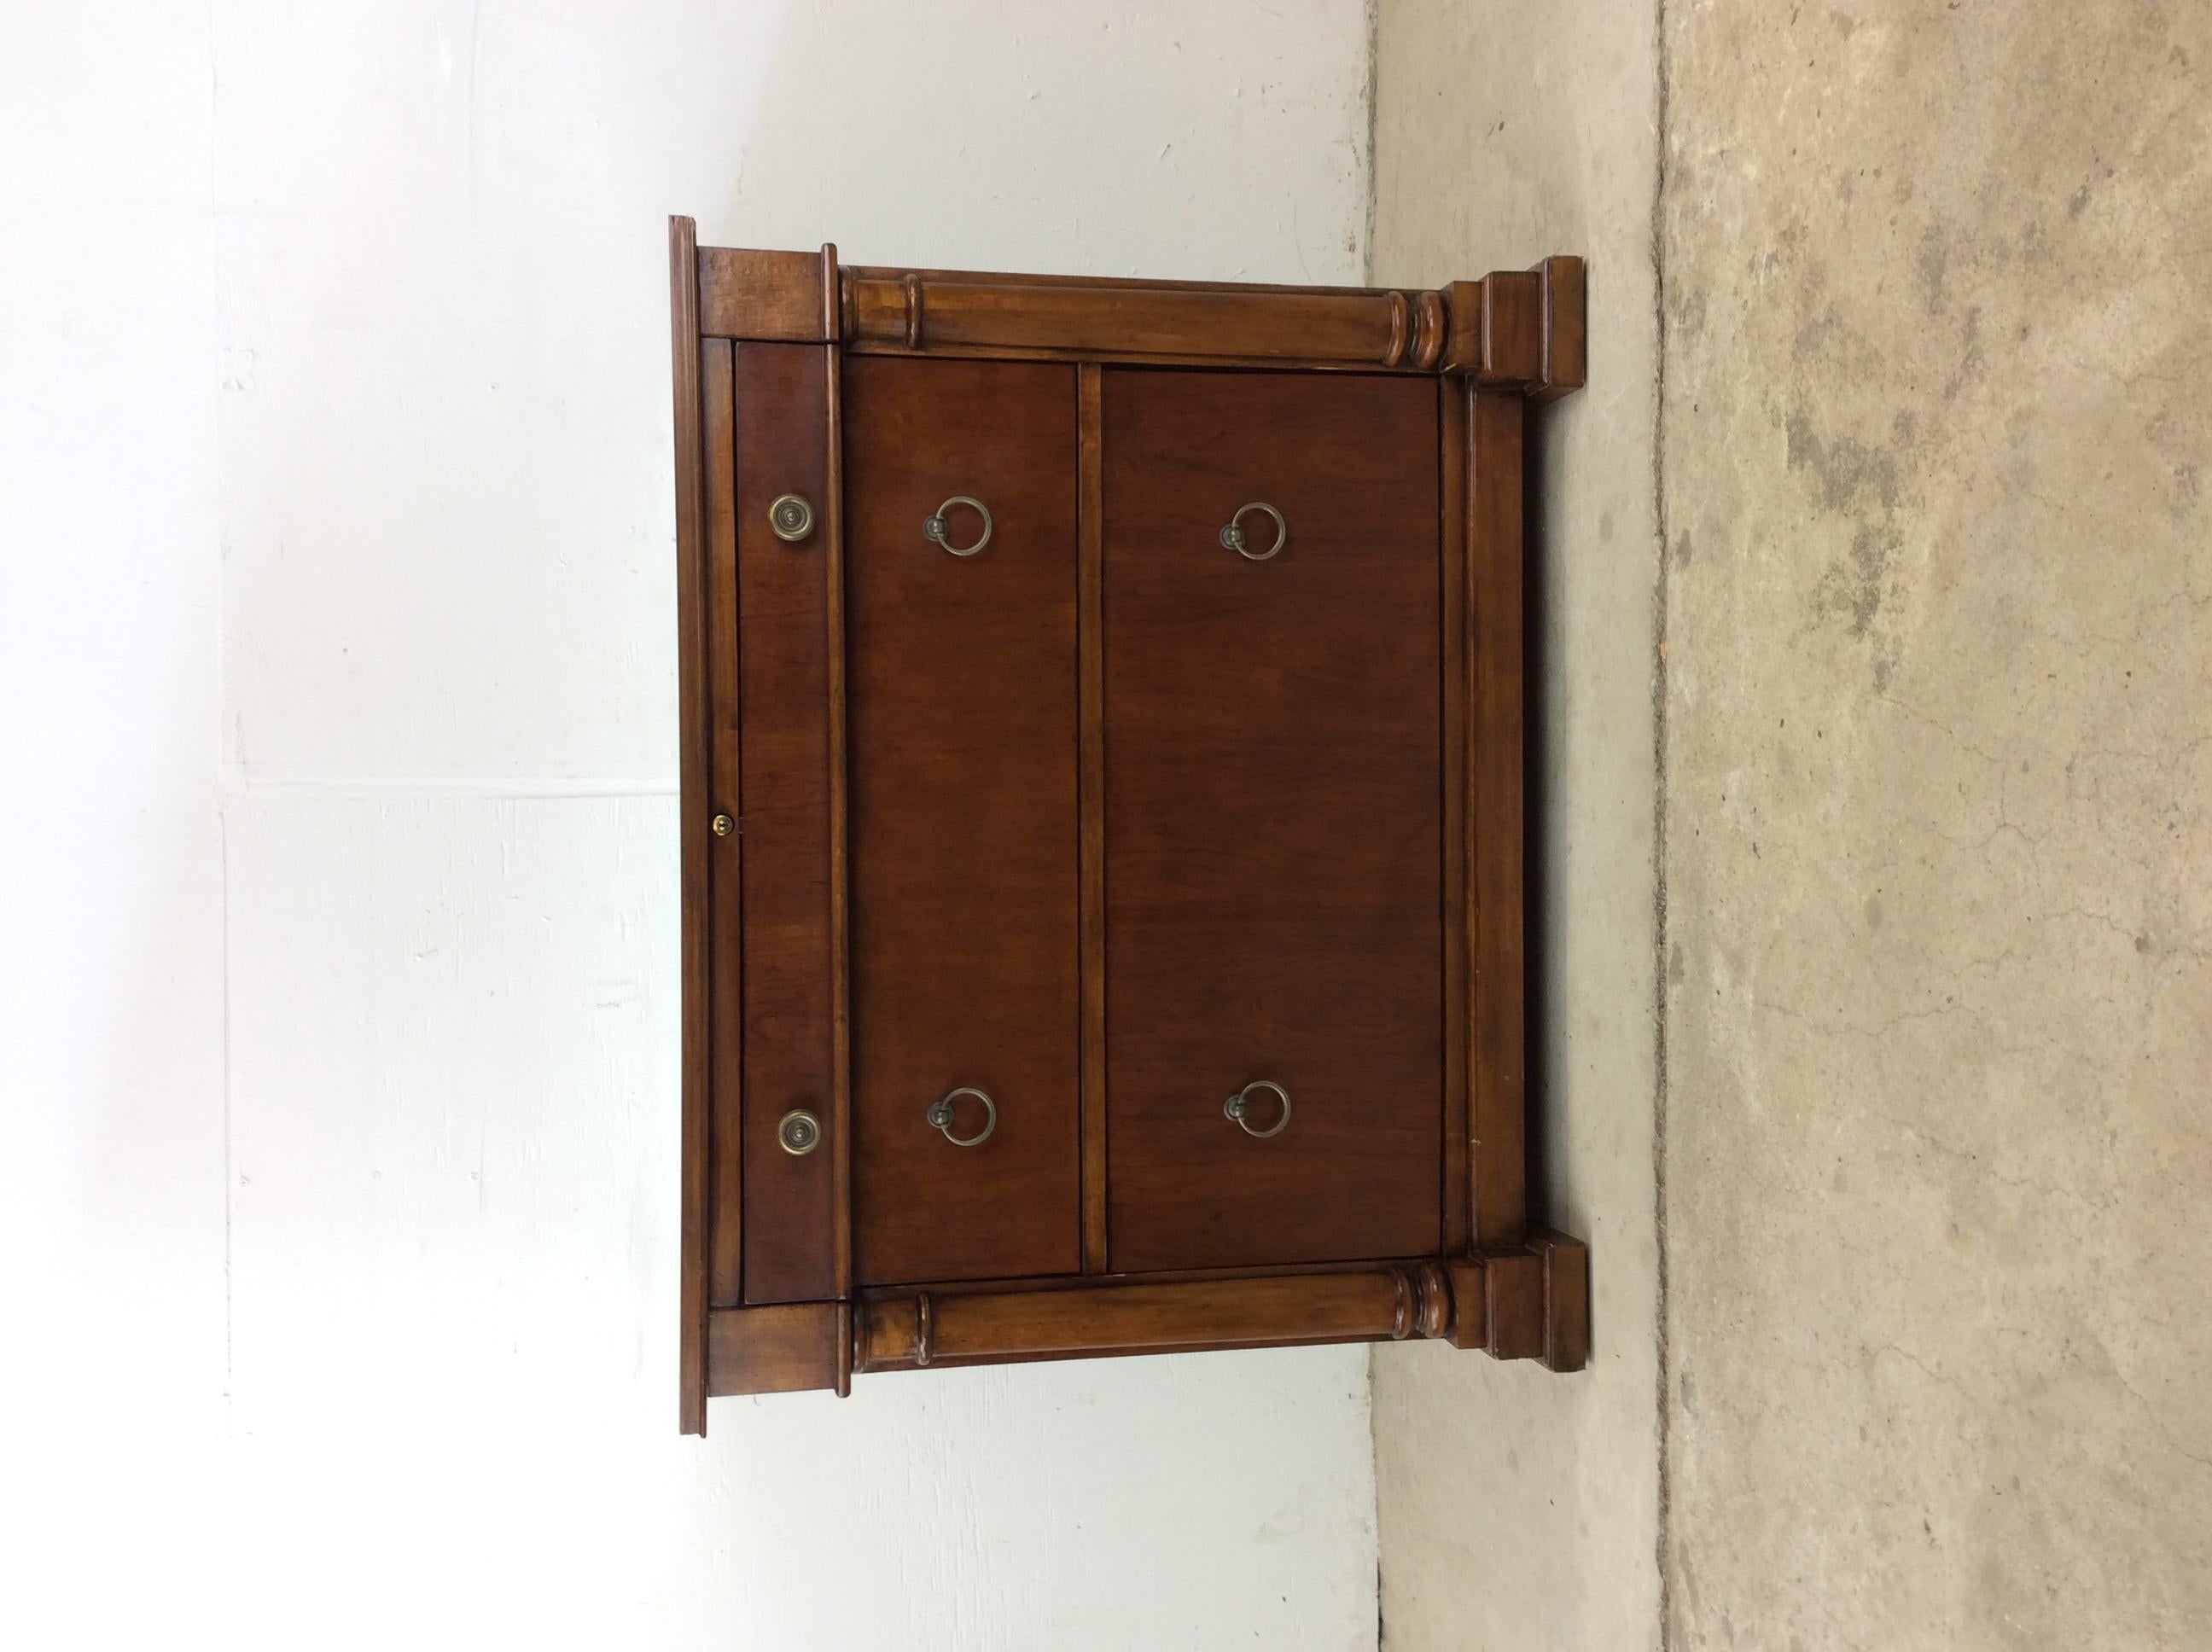 This vintage federalist style chest of drawers features hardwood construction, original cherry finish, brass accented hardware and one locking top drawer.

Dimensions: 37.75w 22.25d 30.5h

Condition: Original finish is in excellent condition.